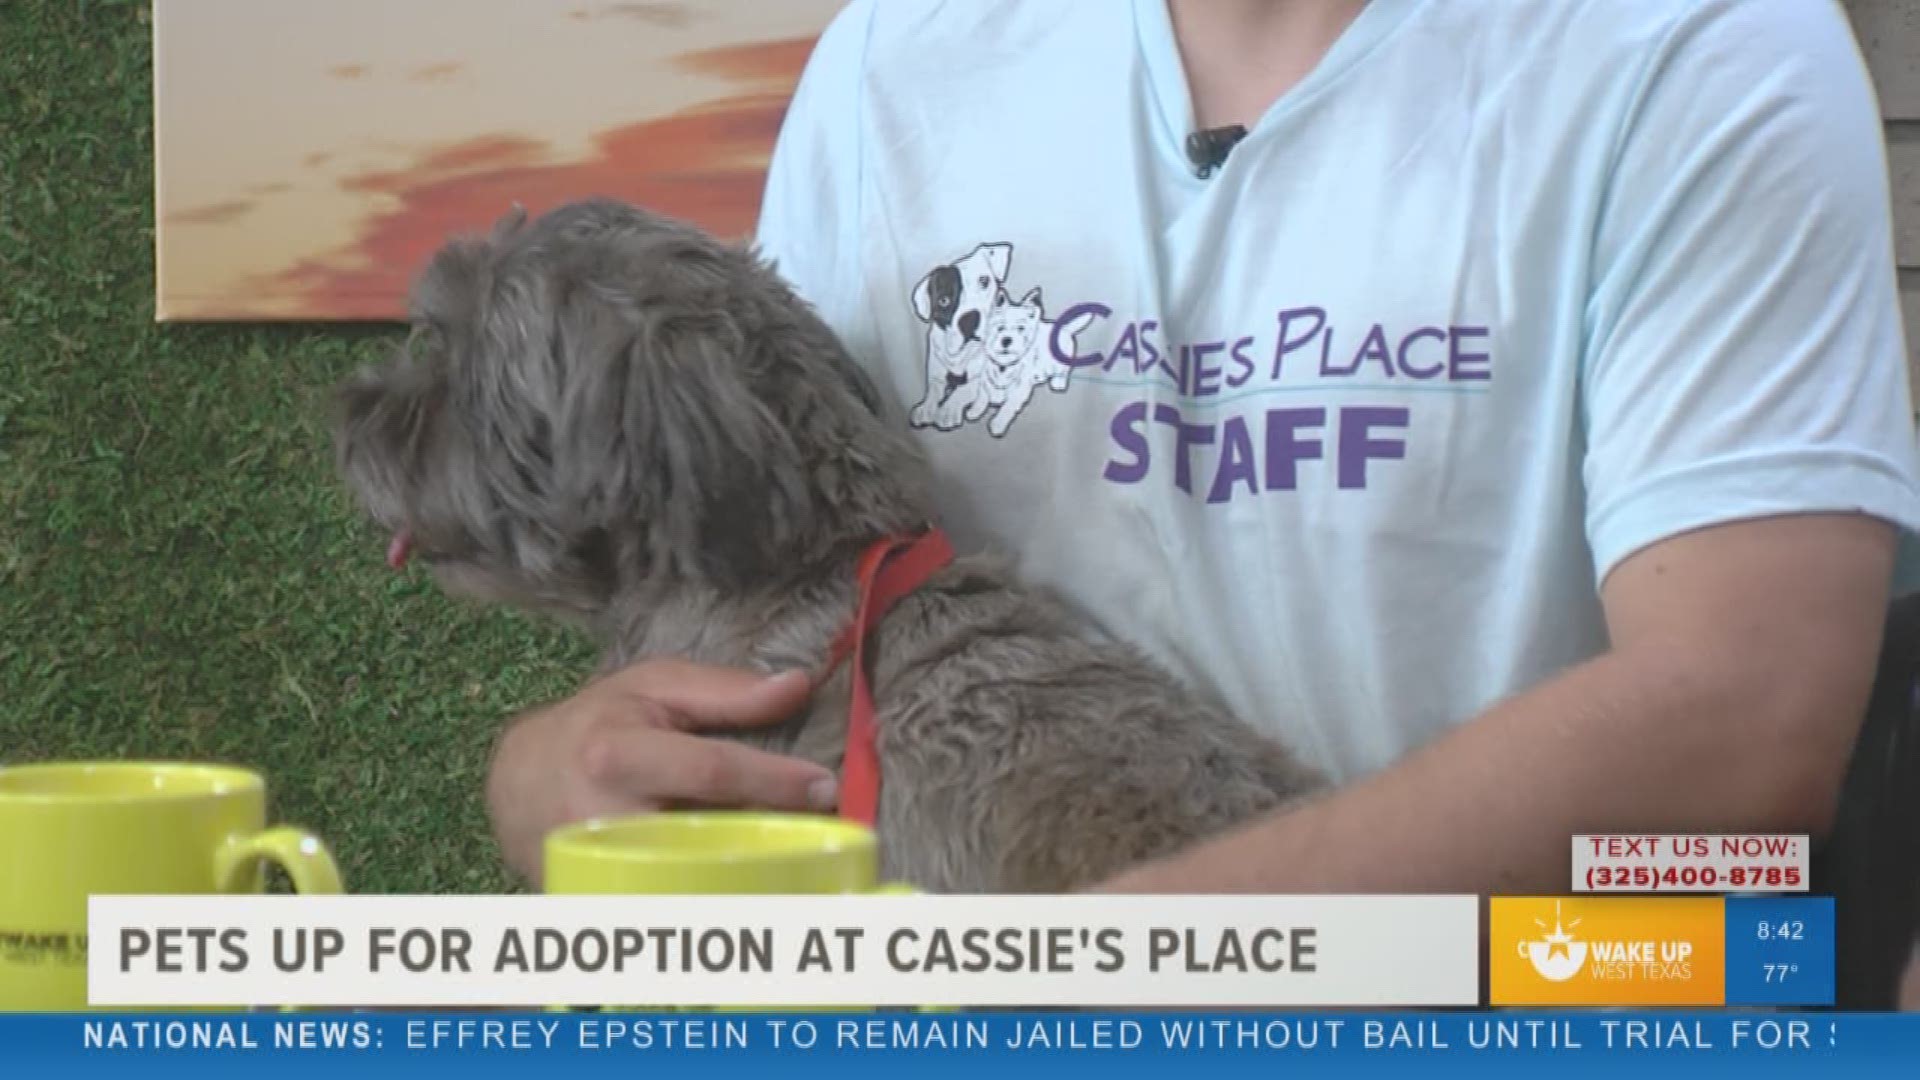 Our Malik Mingo spoke with a representative from Cassie's Place about how to adopt Sophie and animals at the shelter.